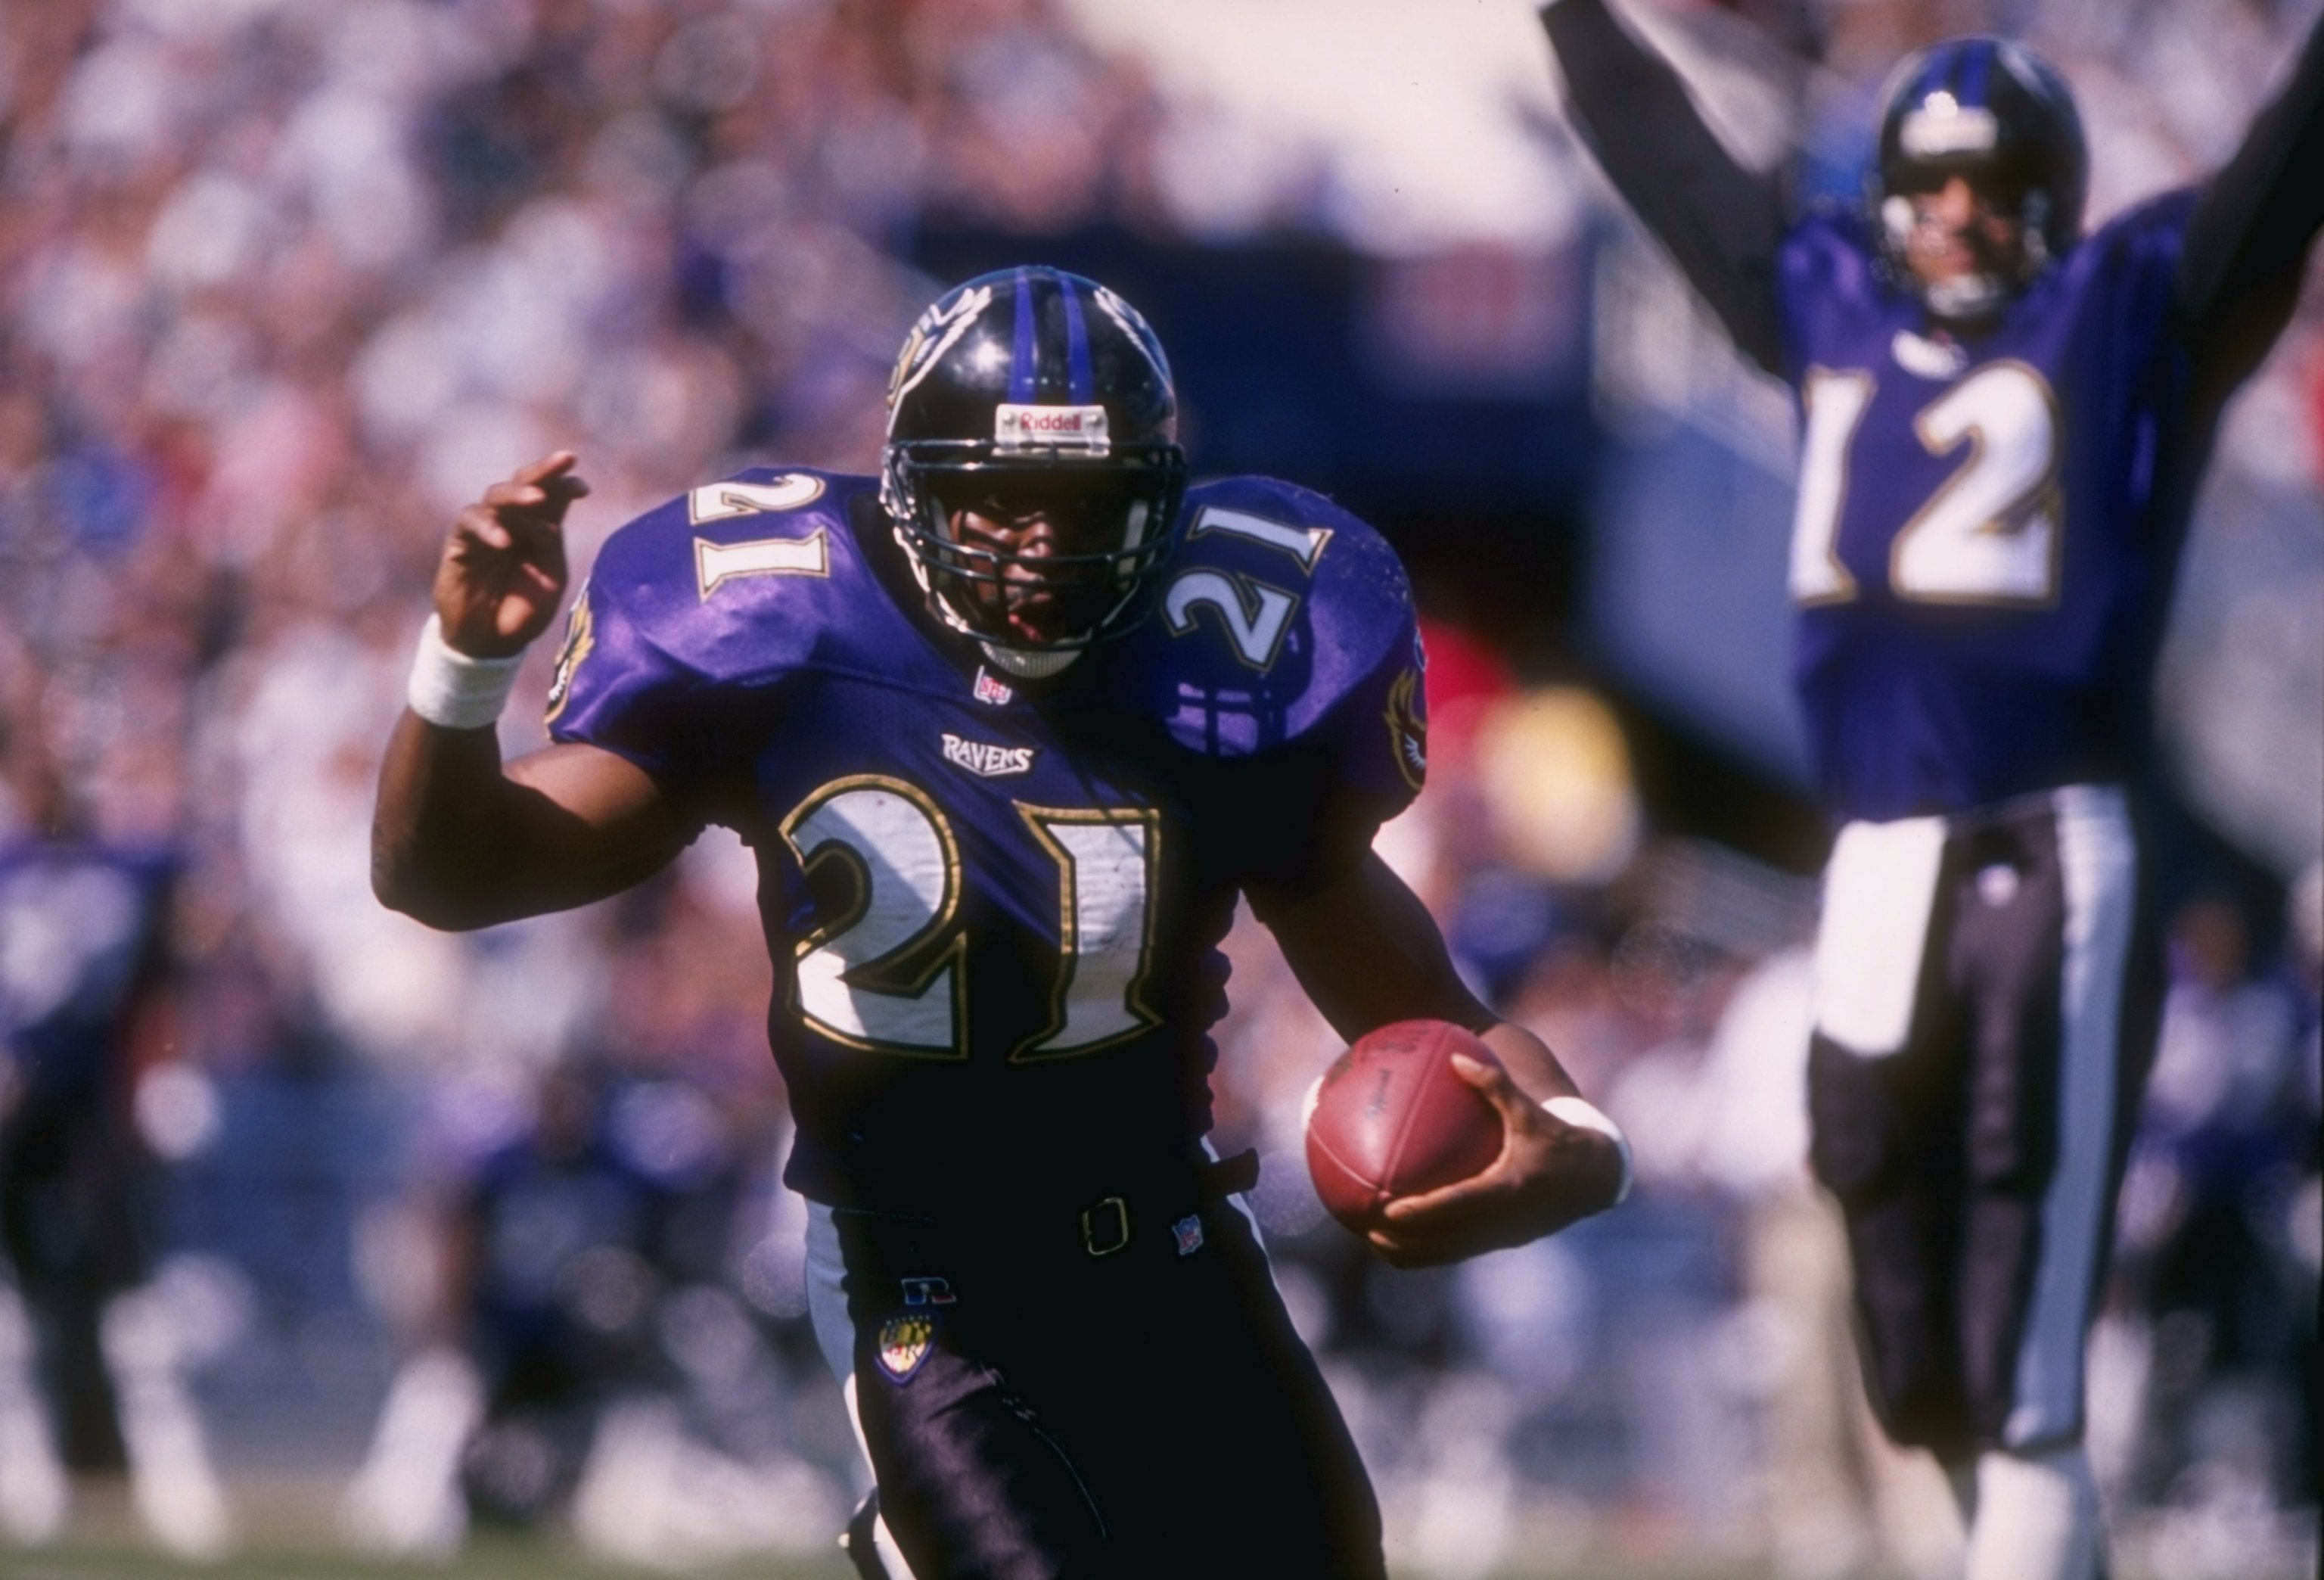 6 Oct 1996: Running back Earnest Byner #21 of the Baltimore Ravens keeps his eyes focused up field as makes a cut to the outside to avoid pursuing tacklers from the New England Patriots and score a touch down as quarterback Vinny Testaverde celebrates in